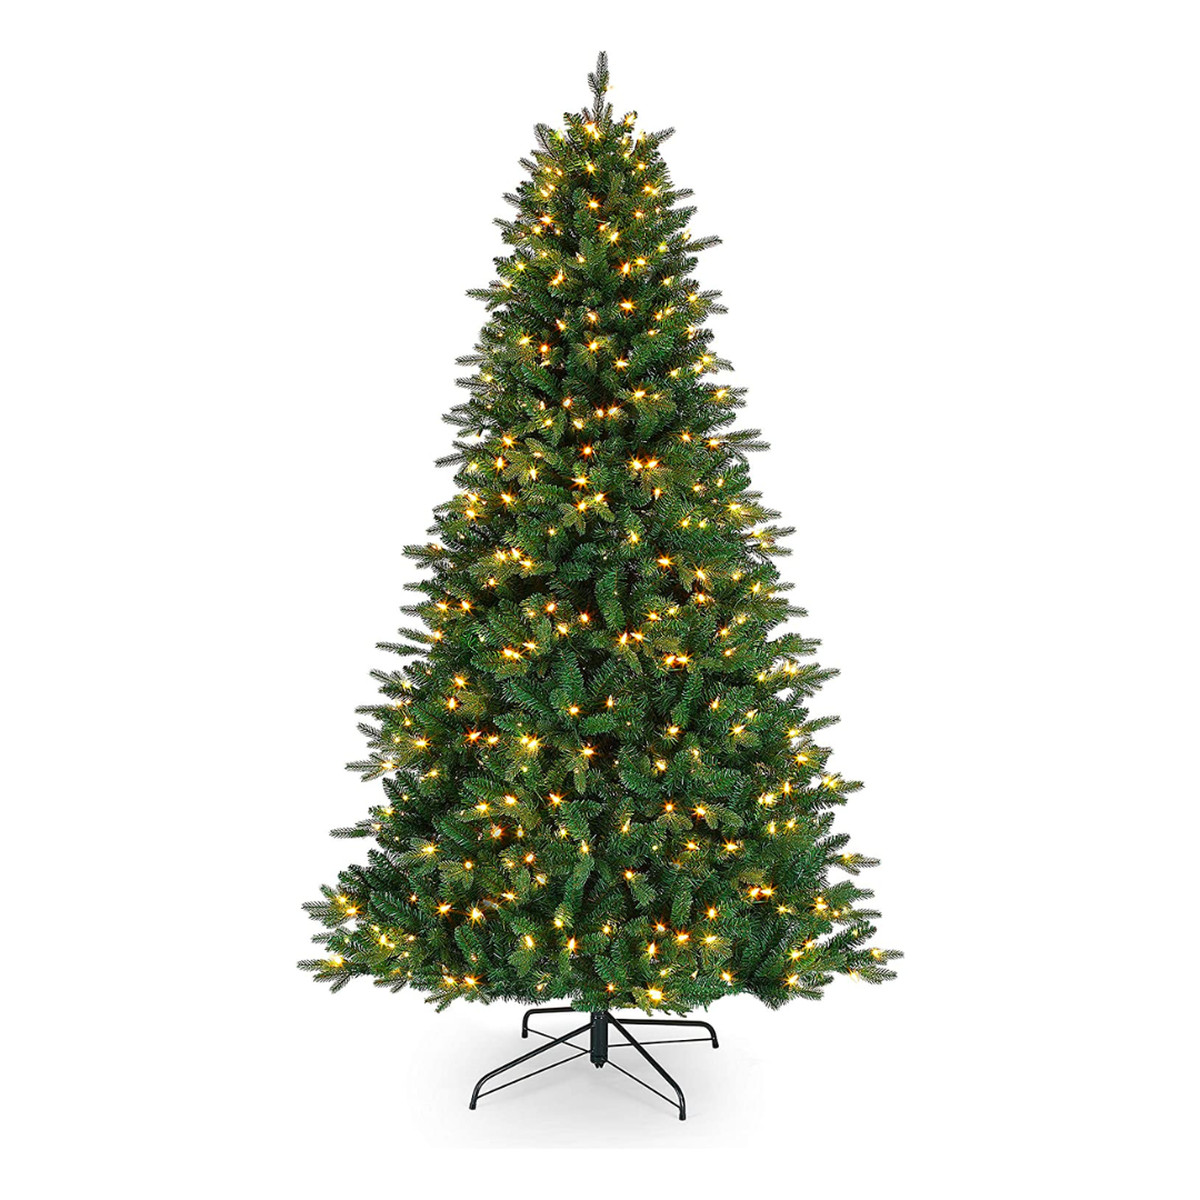 Pre-lit green artificial Mr. Christmas Vermont spruce Christmas tree with stand at bottom